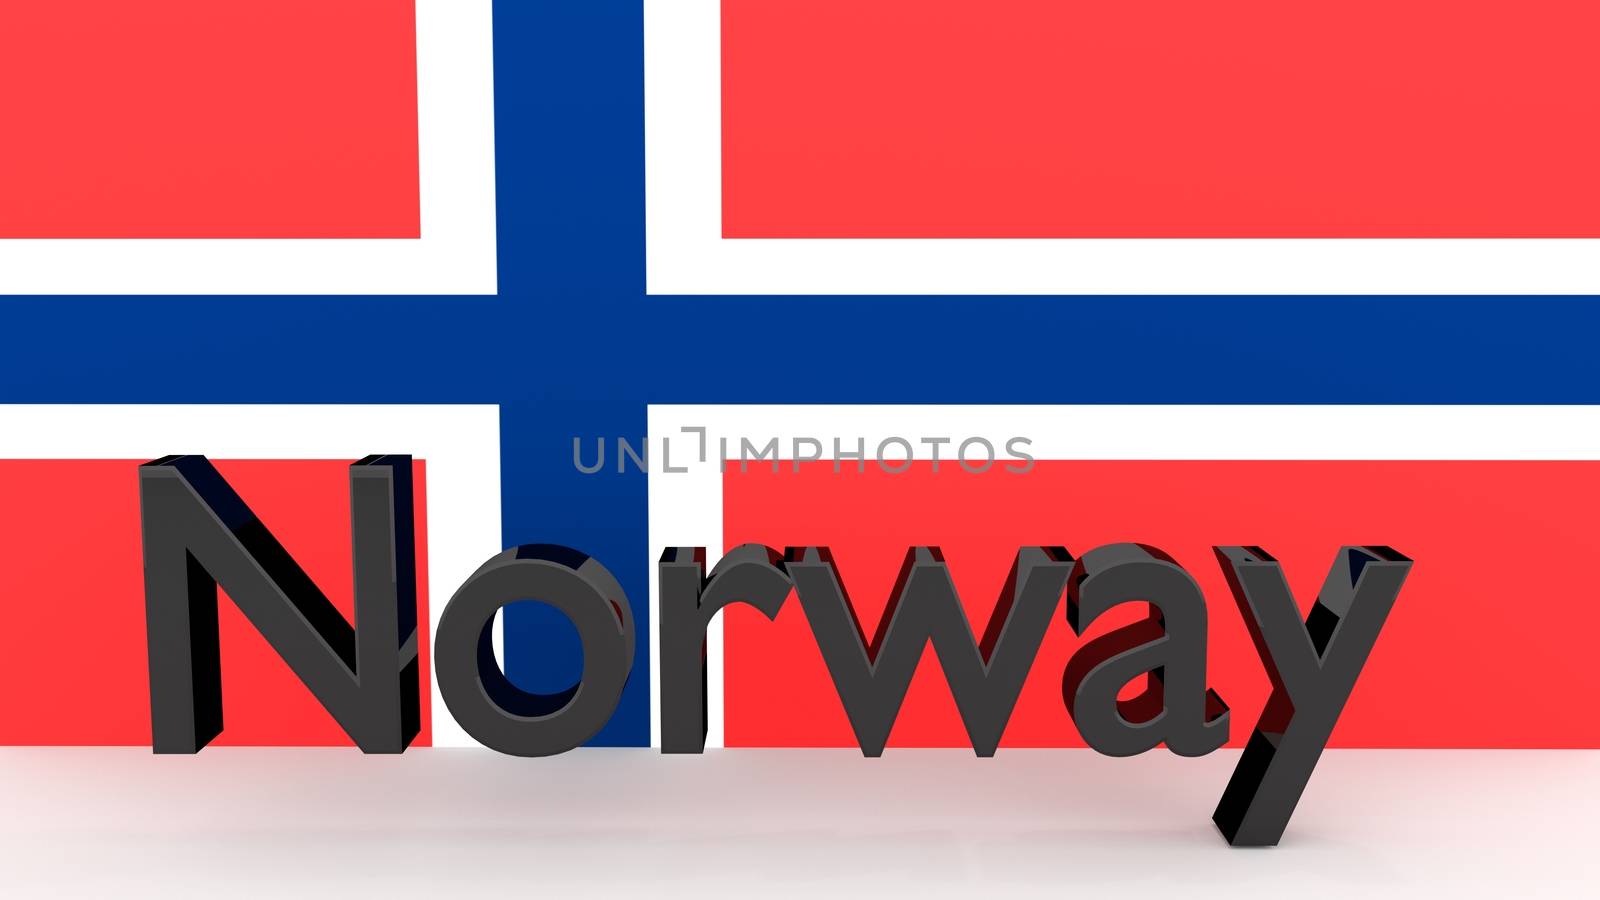 Writing Norway made of dark metal  in front of a norwegian flag